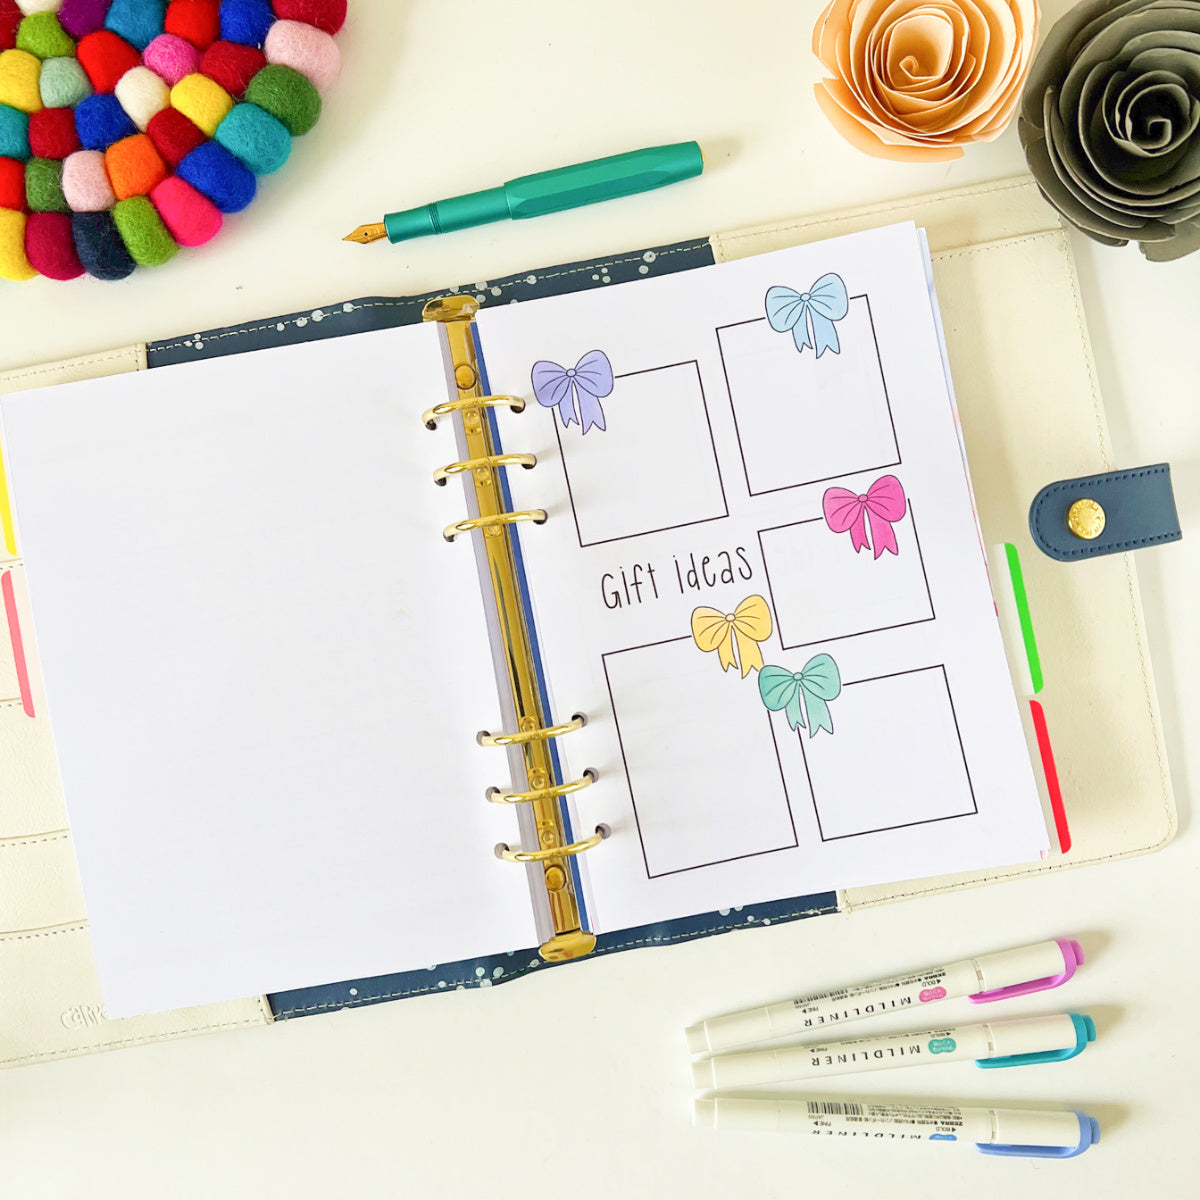 An open planner lies on a white surface, displaying a "Gift Ideas" page with five boxes, each adorned with a colorful bow. Nearby are pens, a green fountain pen, a Birthday Calendar for seamless birthday planning, and two decorative paper flowers, one orange and one grey.